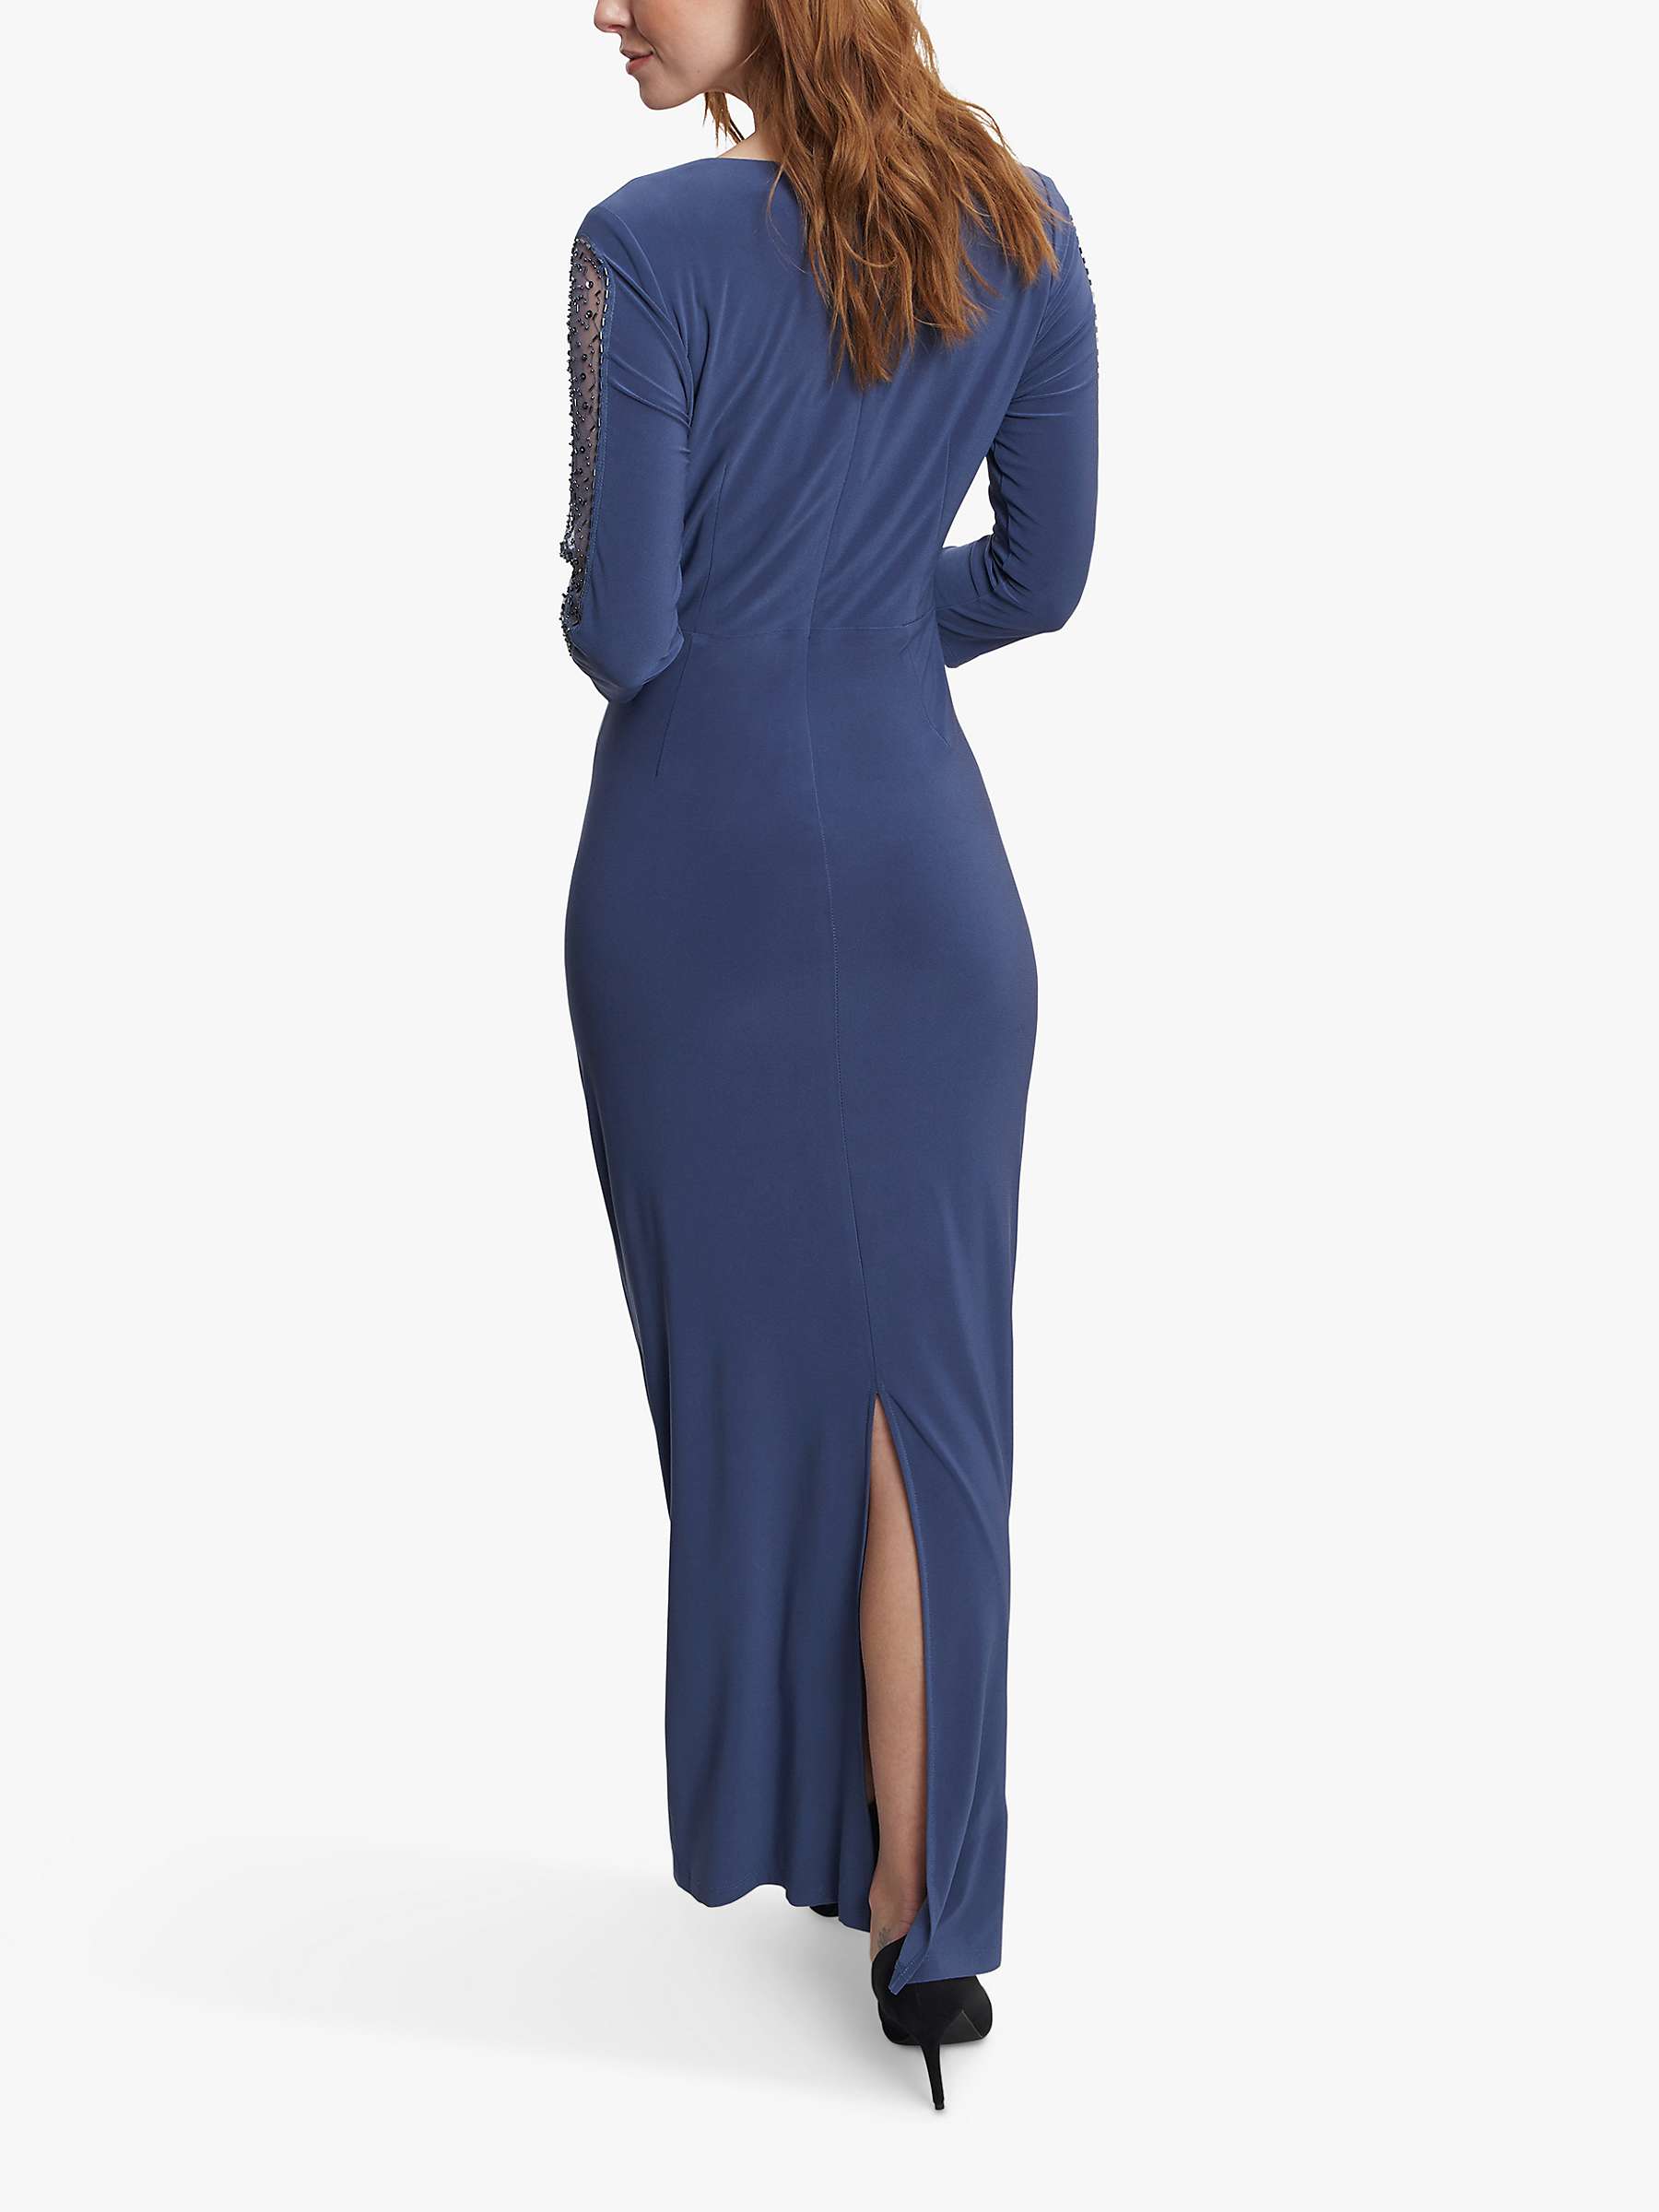 Buy Gina Bacconi Gretchen Ruched Maxi Dress, Wedgewood Online at johnlewis.com